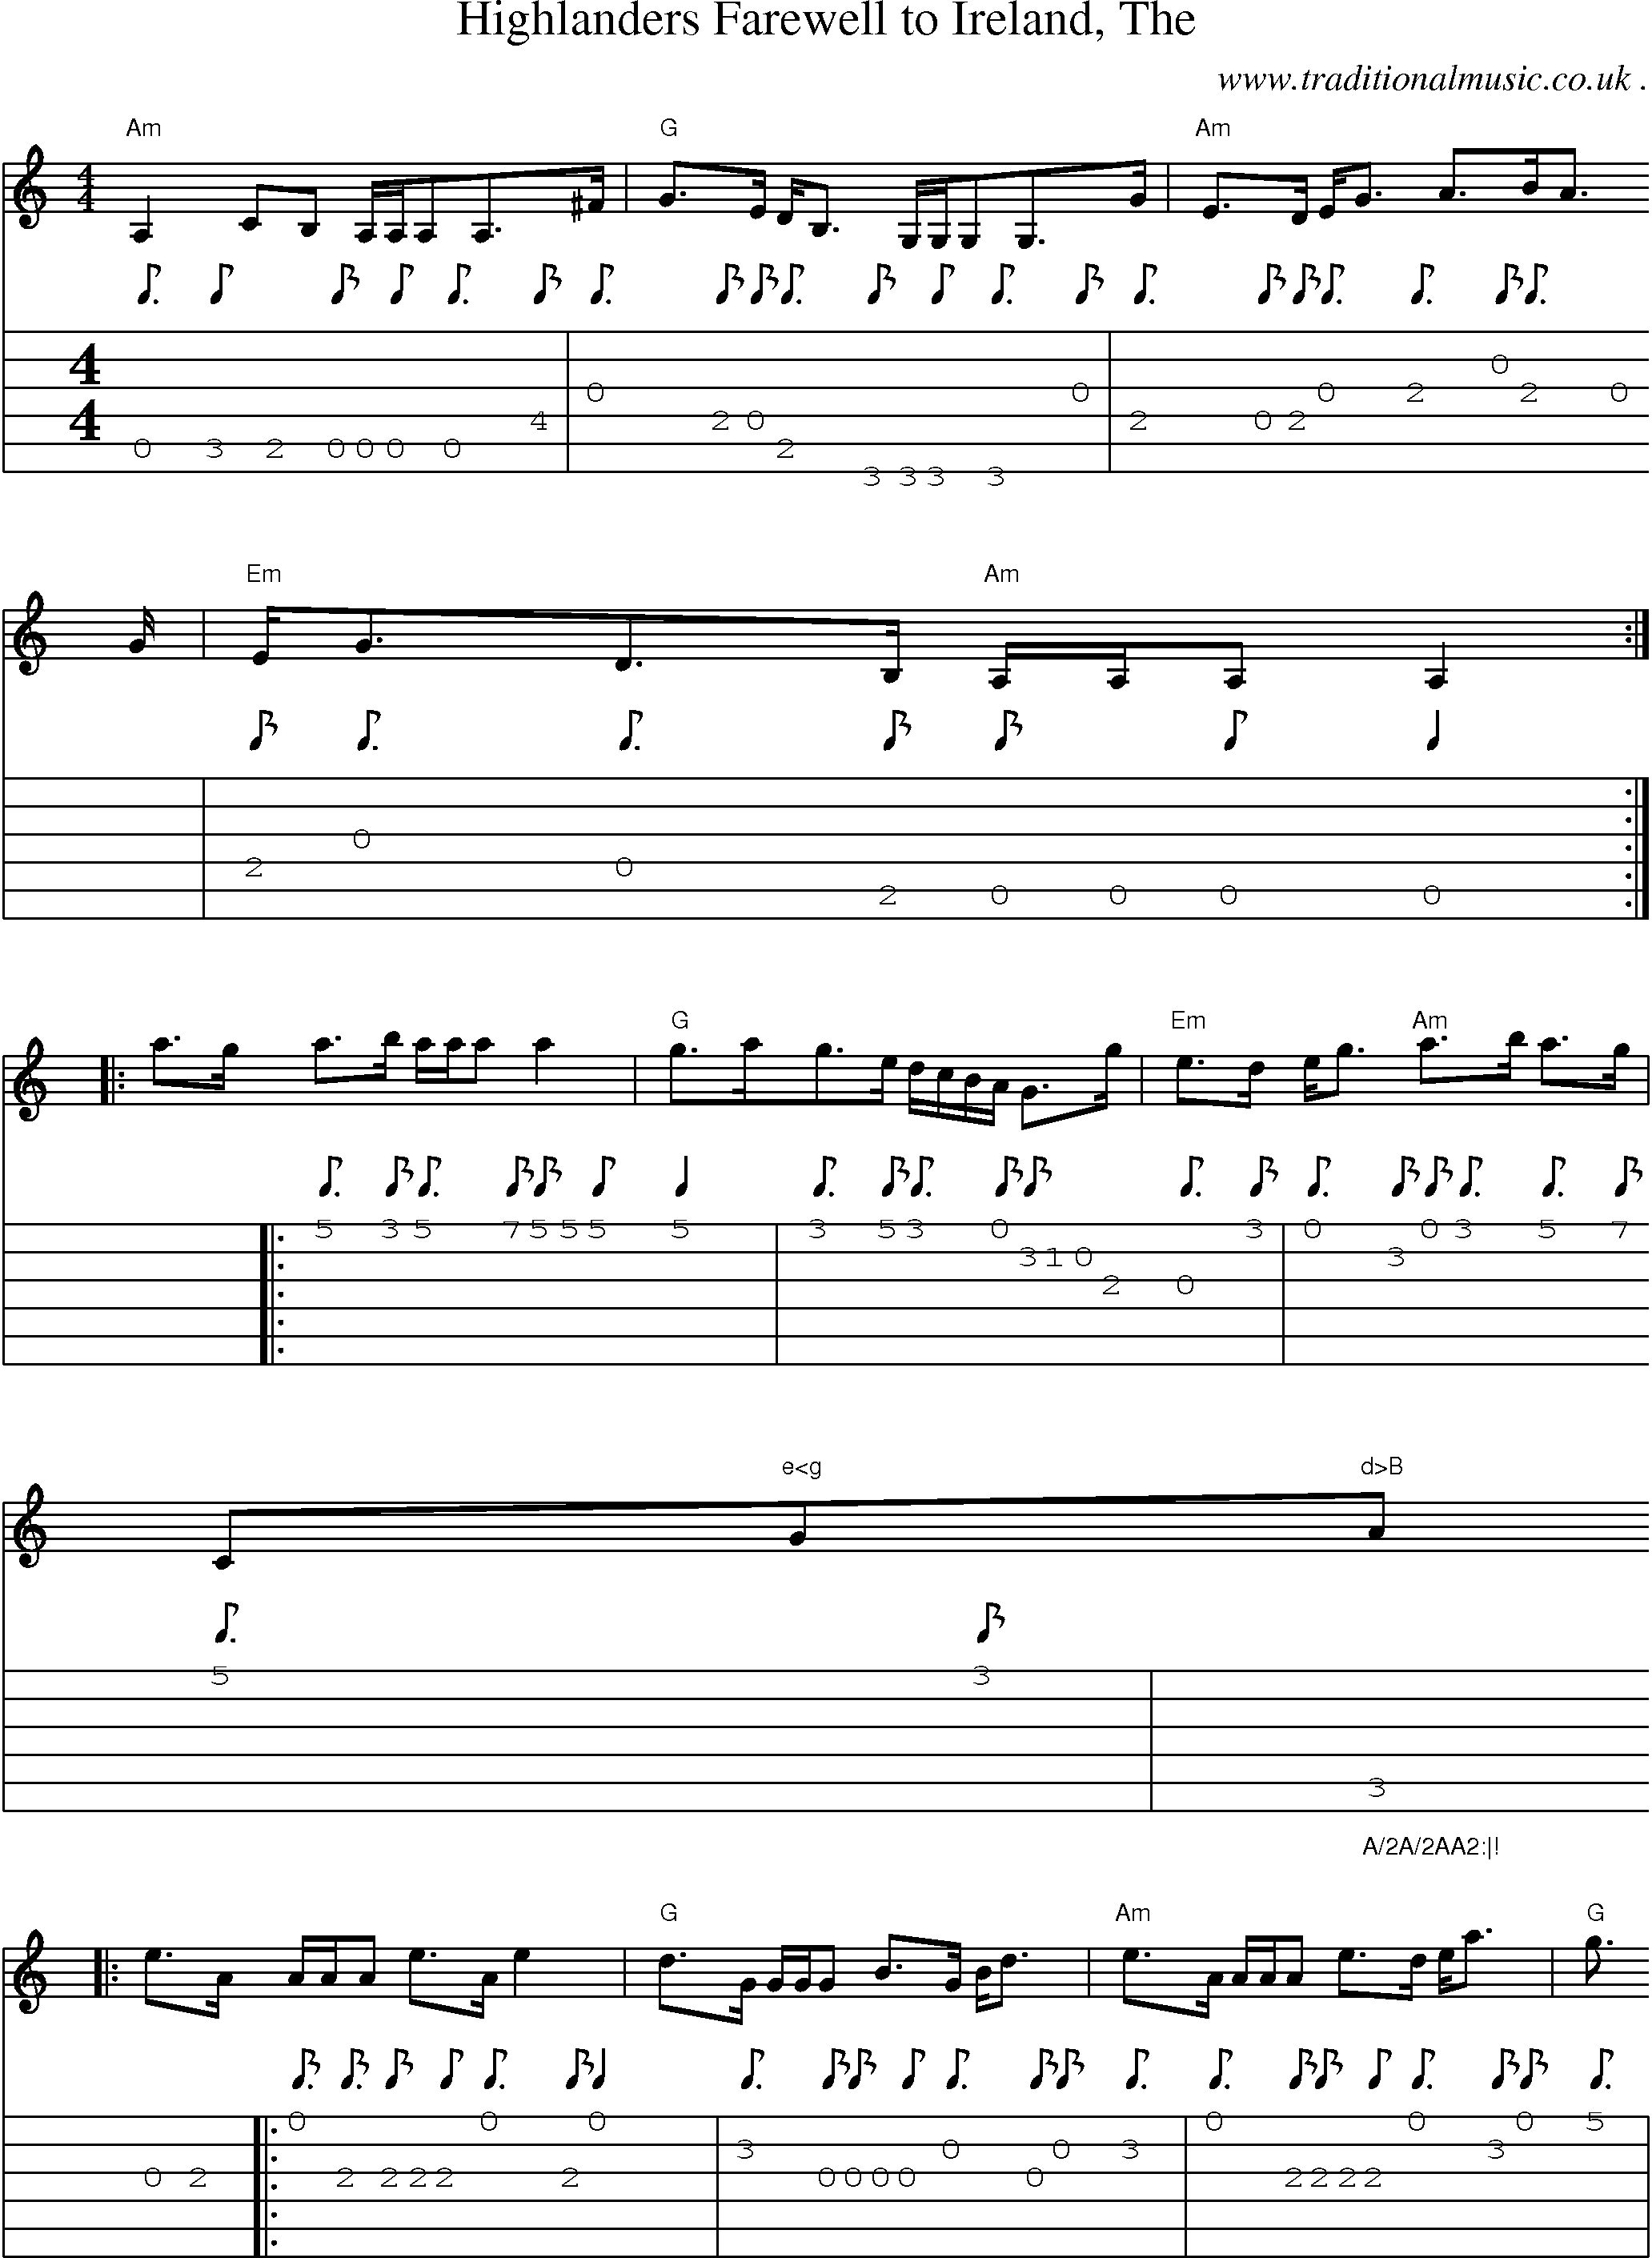 Sheet-music  score, Chords and Guitar Tabs for Highlanders Farewell To Ireland The